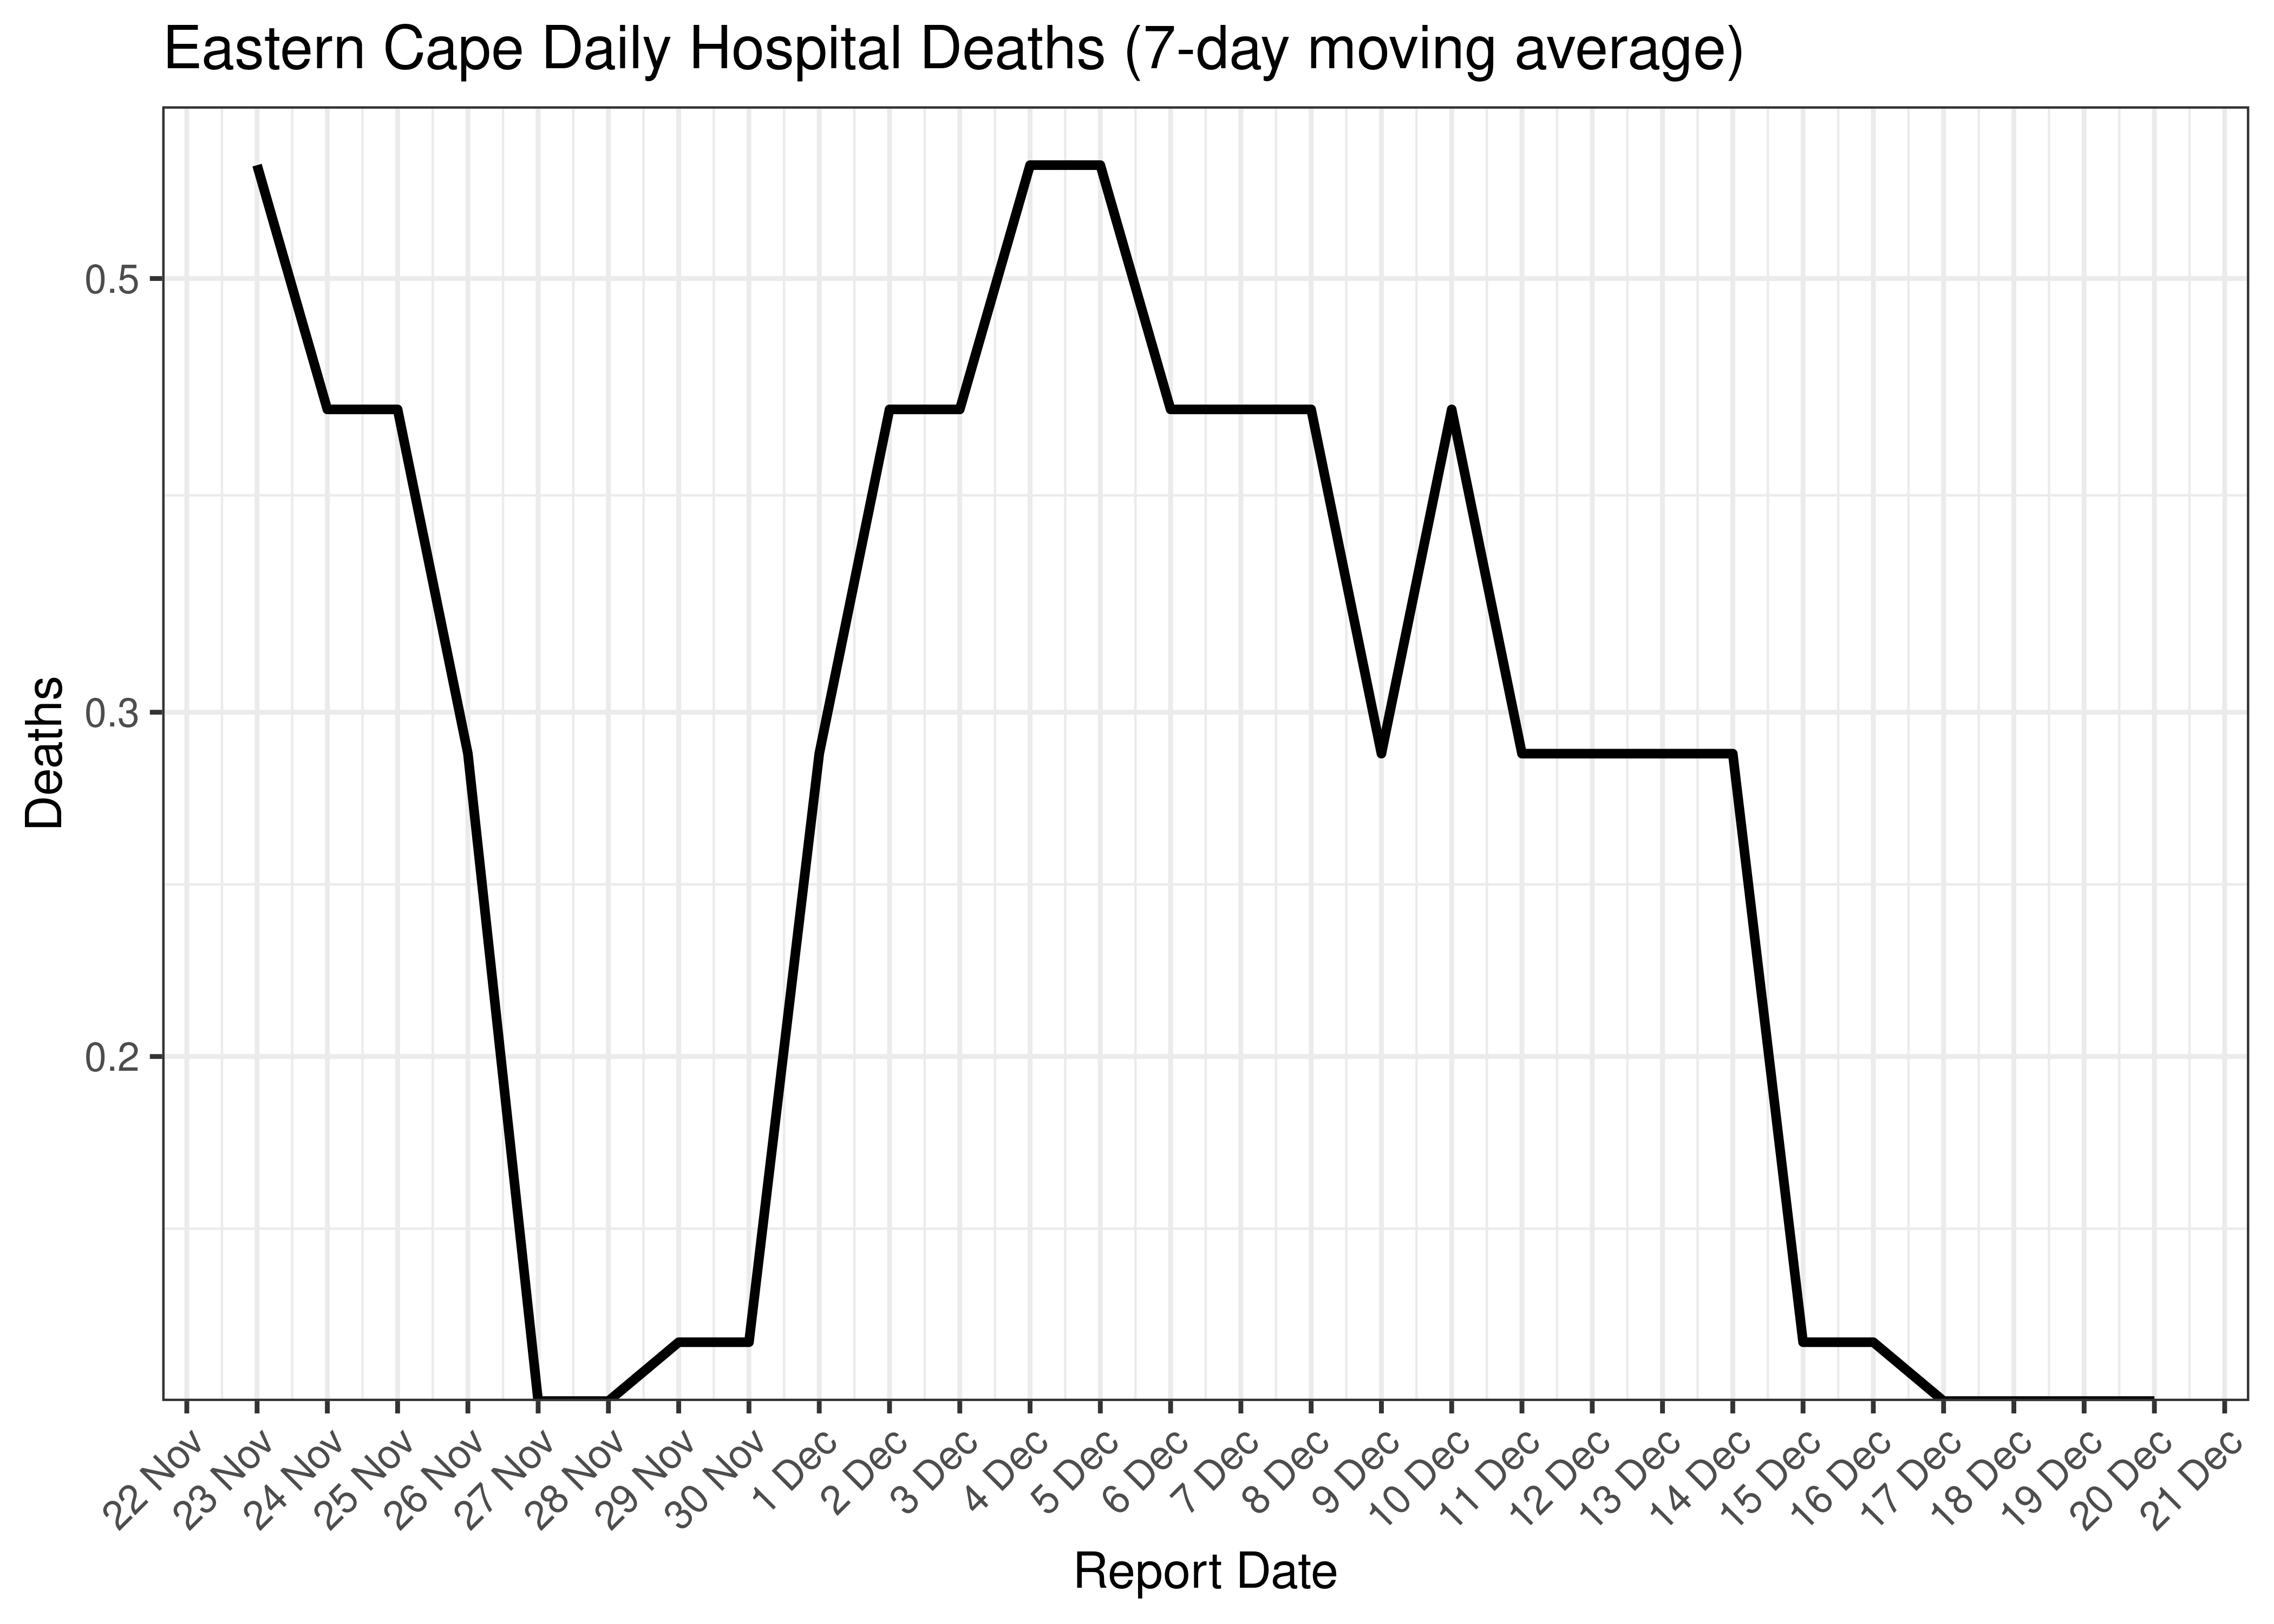 Eastern Cape Daily Hospital Deaths for Last 30-days (7-day moving average)